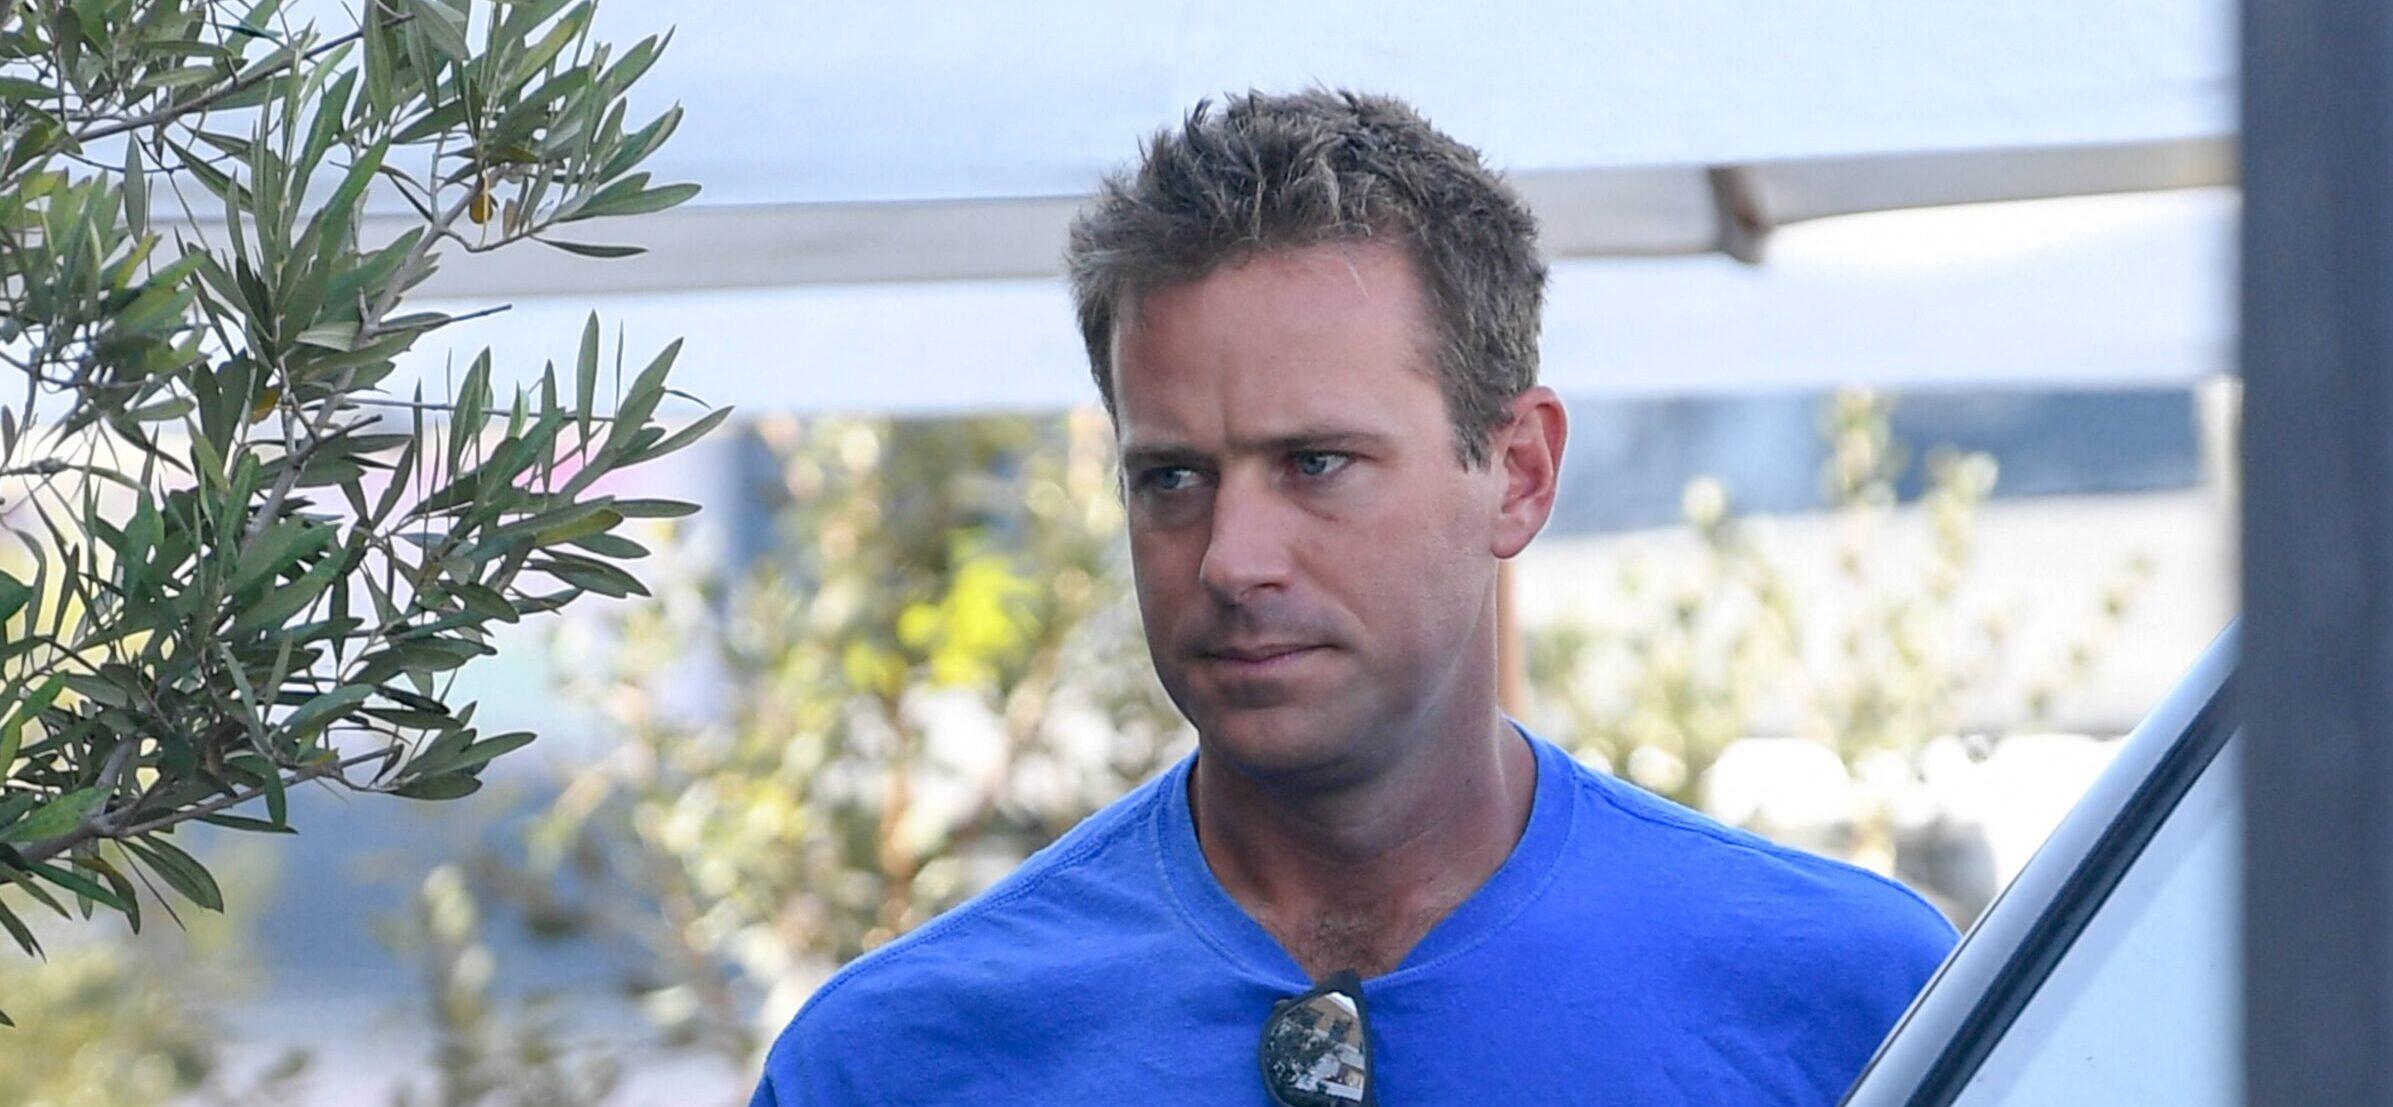 Armie Hammer steps out for breakfast with a friend